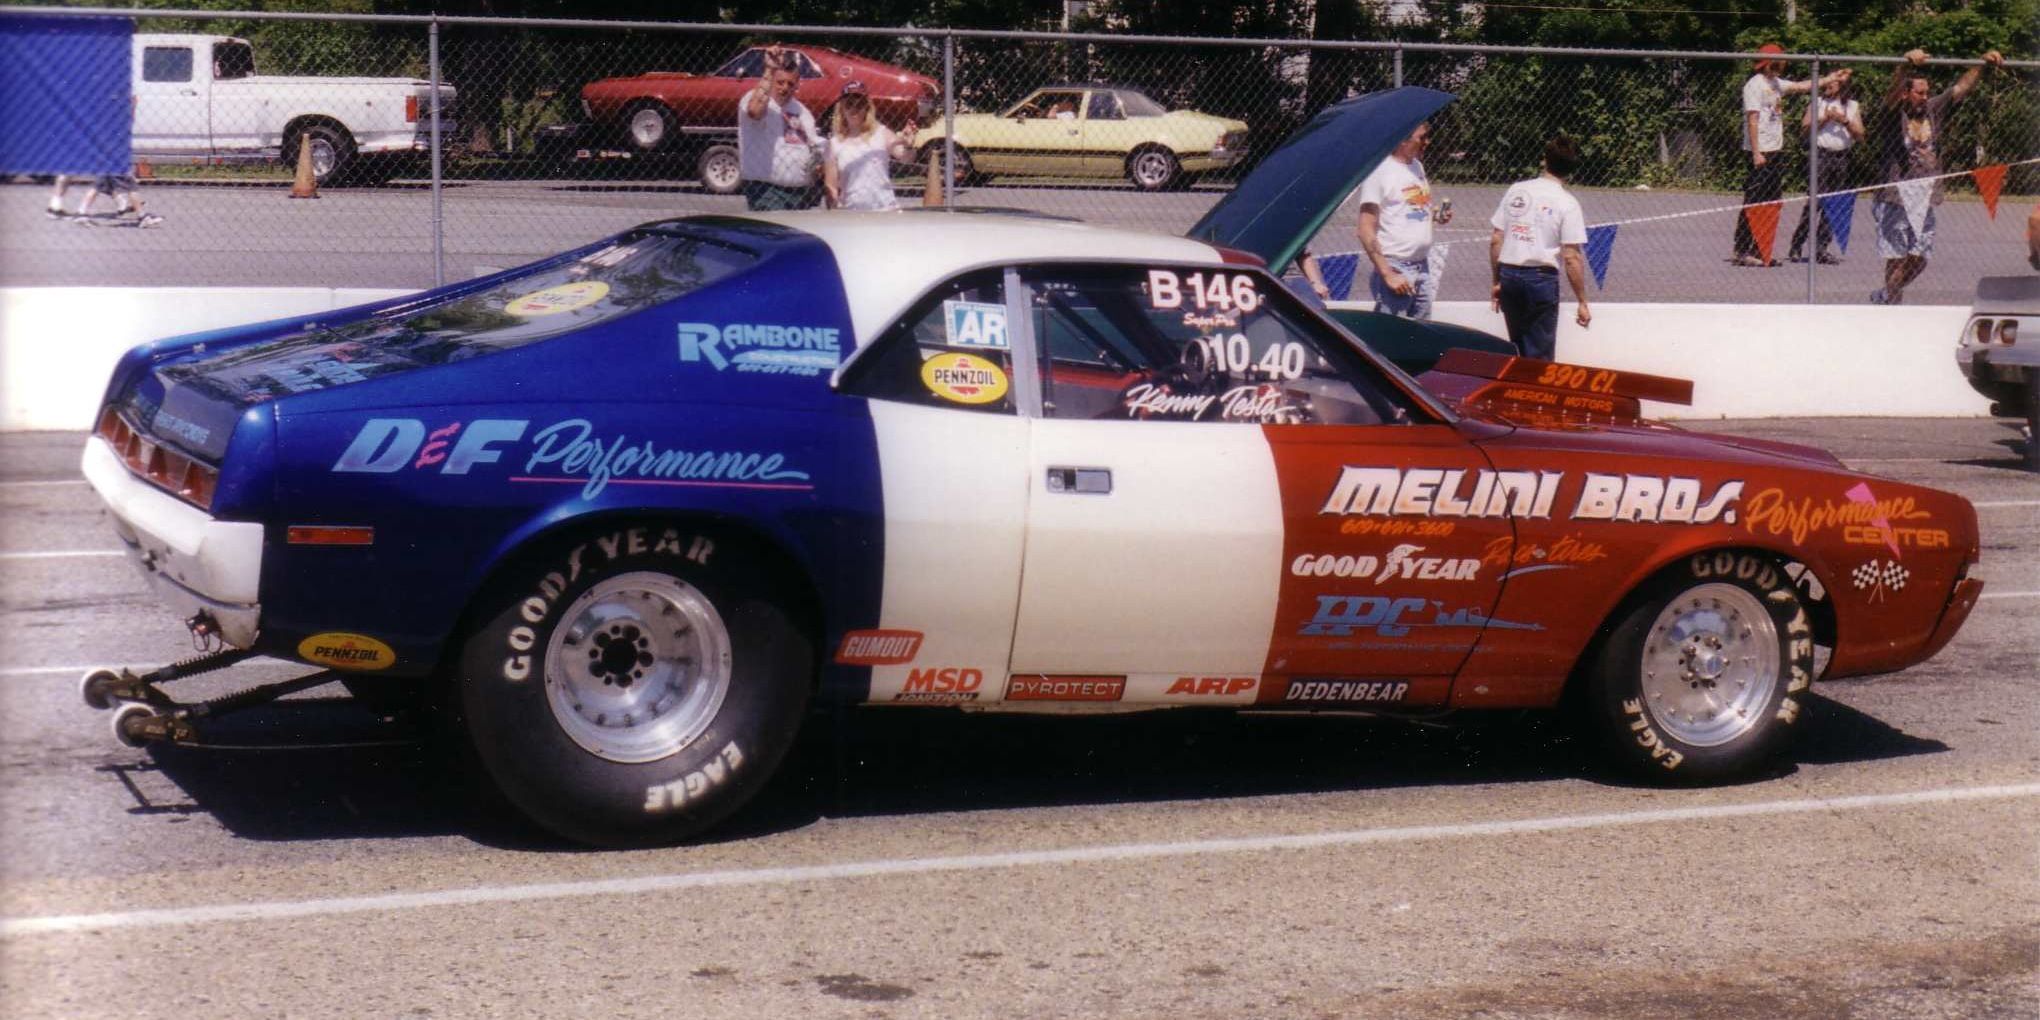 A 1970 AMC Javelin that was used as a race car in the Trans-Am series